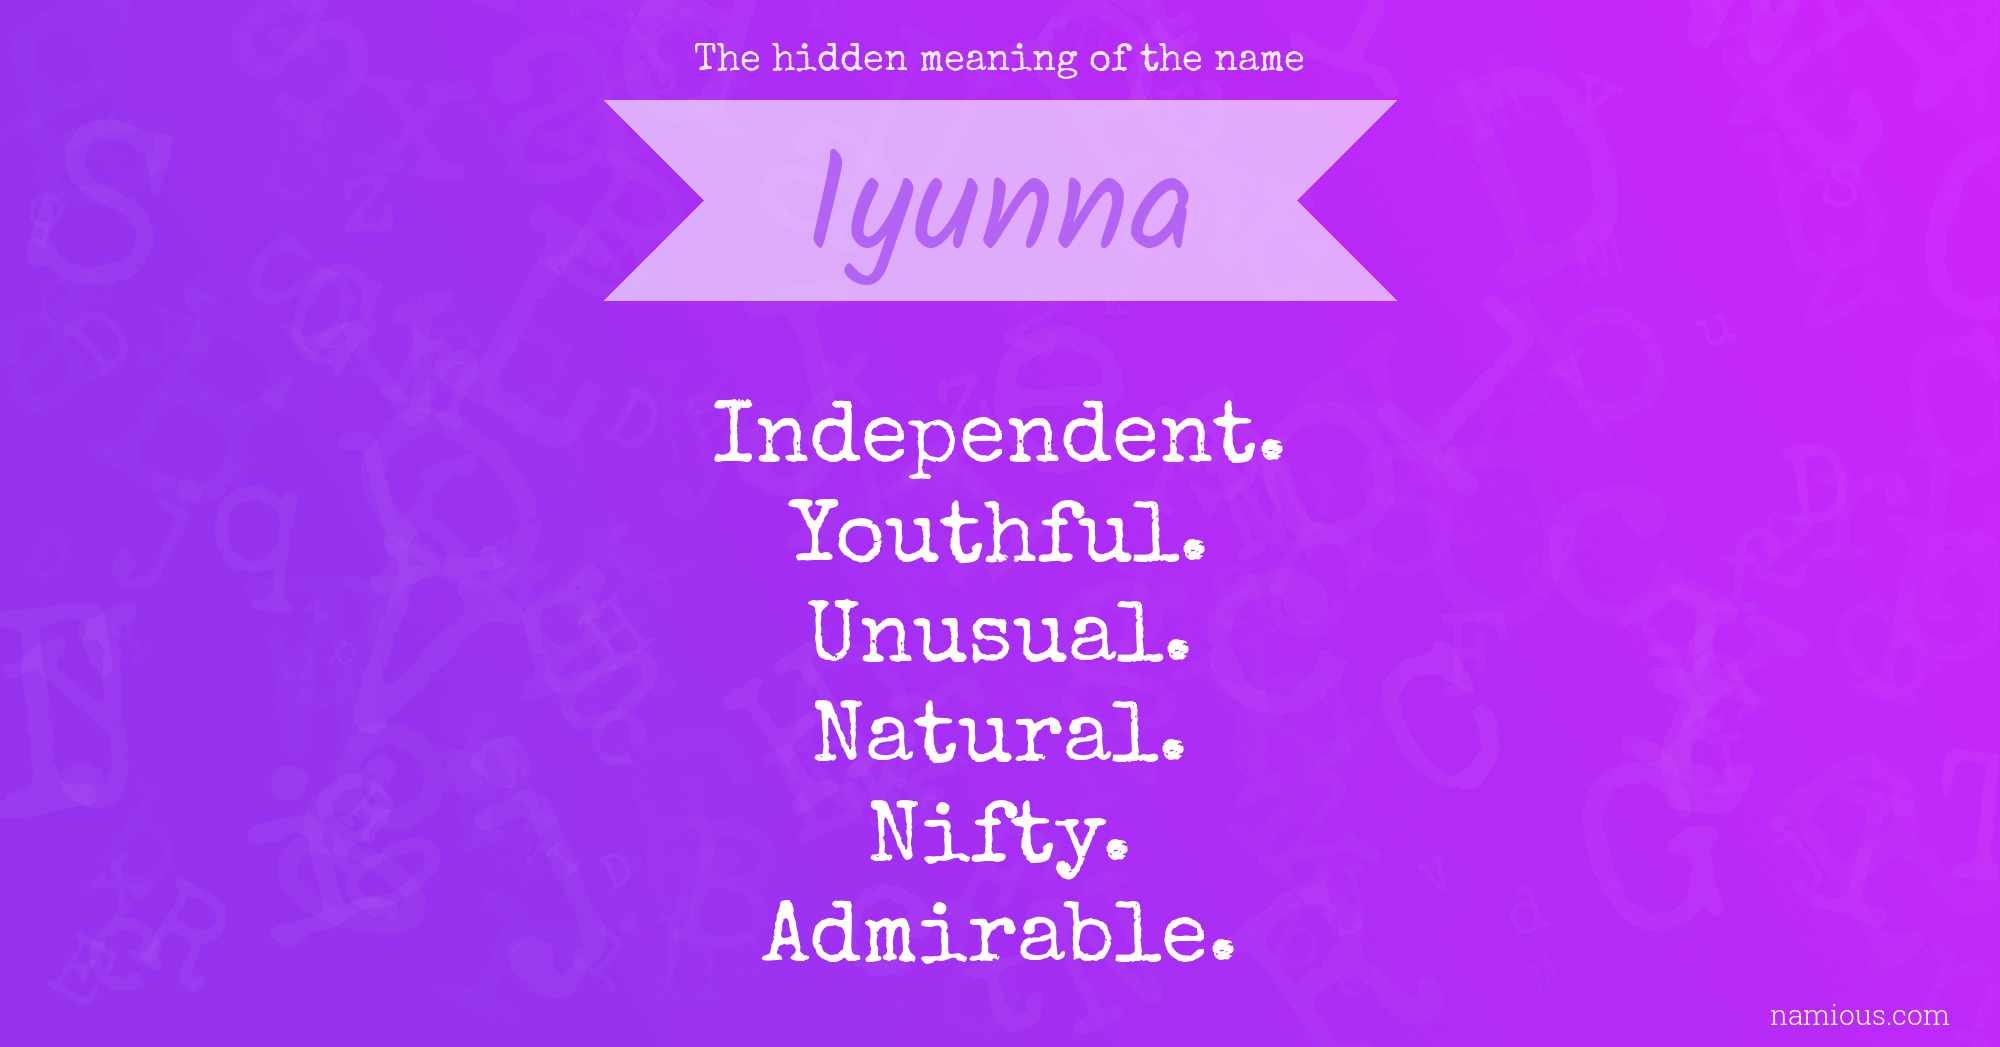 The hidden meaning of the name Iyunna